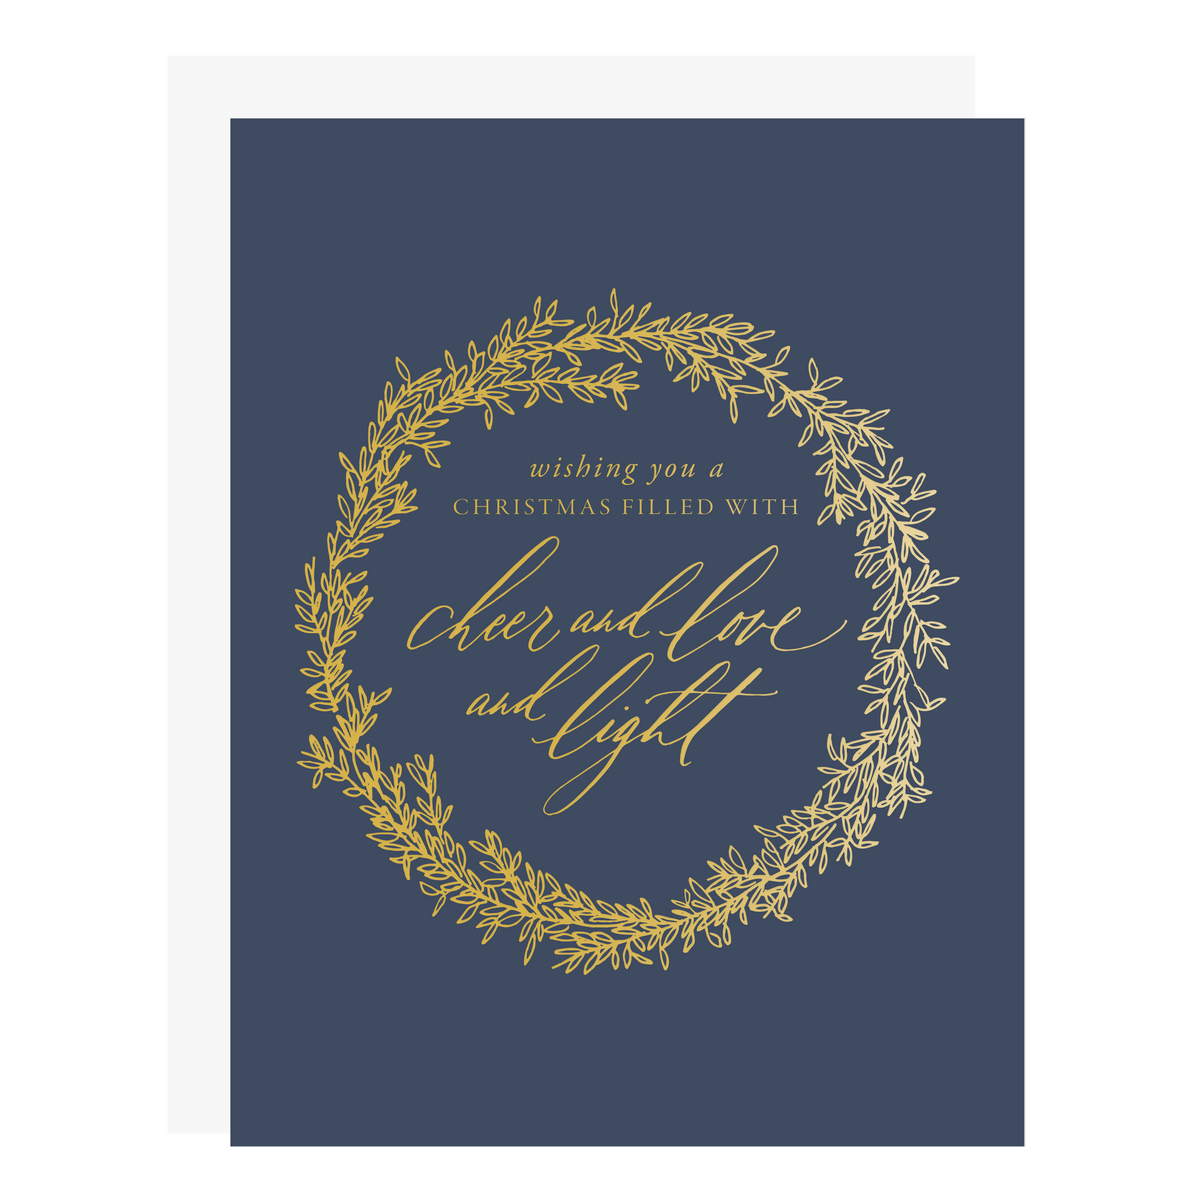 &quot;Cheer, Love, and Light&quot; Christmas card, letterpress printed by hand in gold foil. 